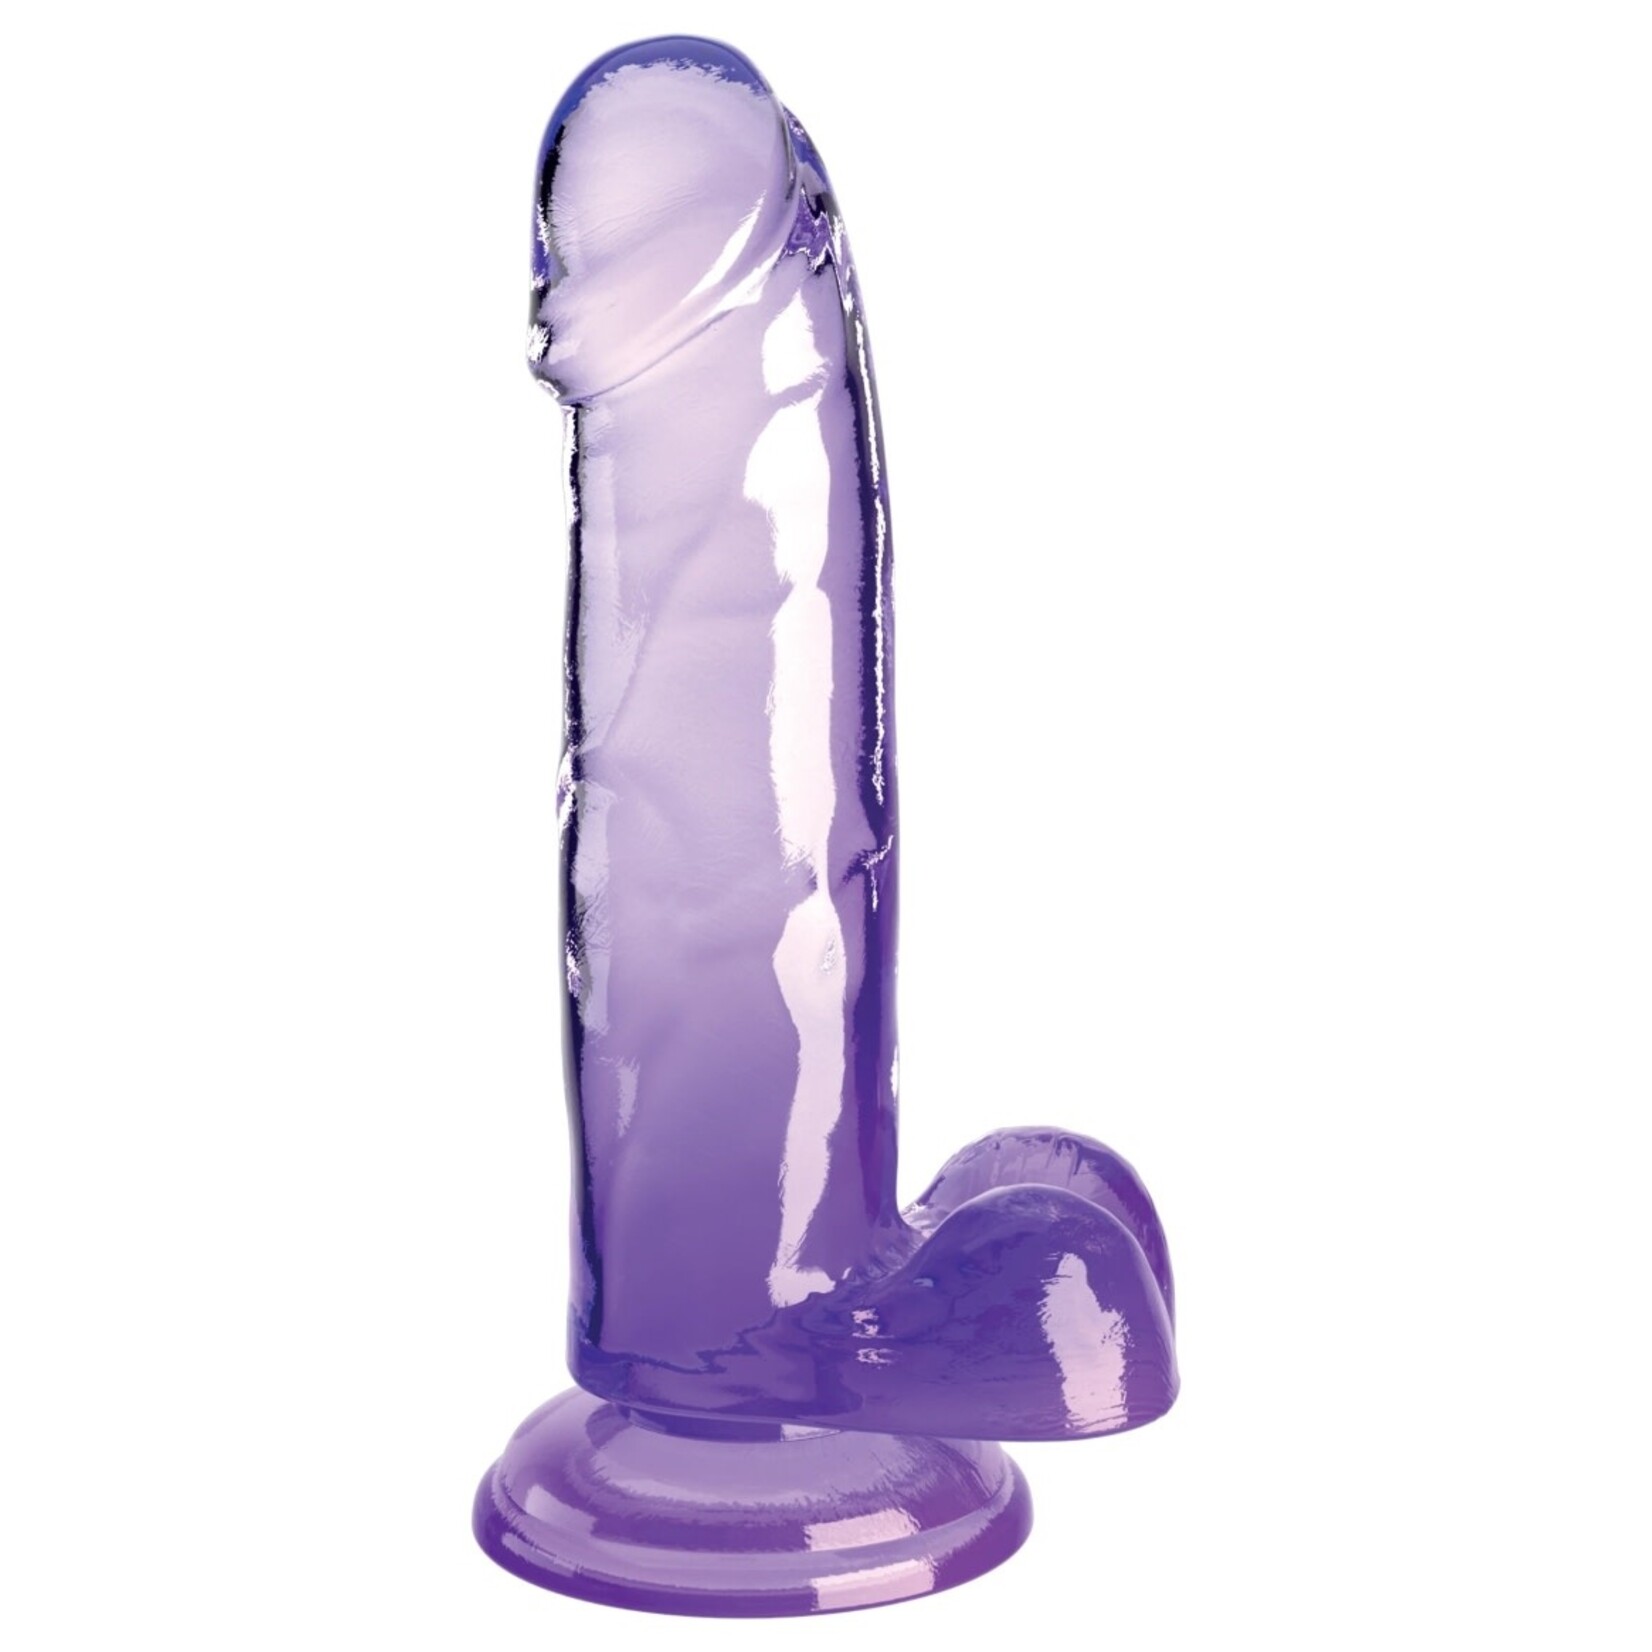 KING COCK KING COCK CLEAR 7" COCK WITH BALLS - PURPLE